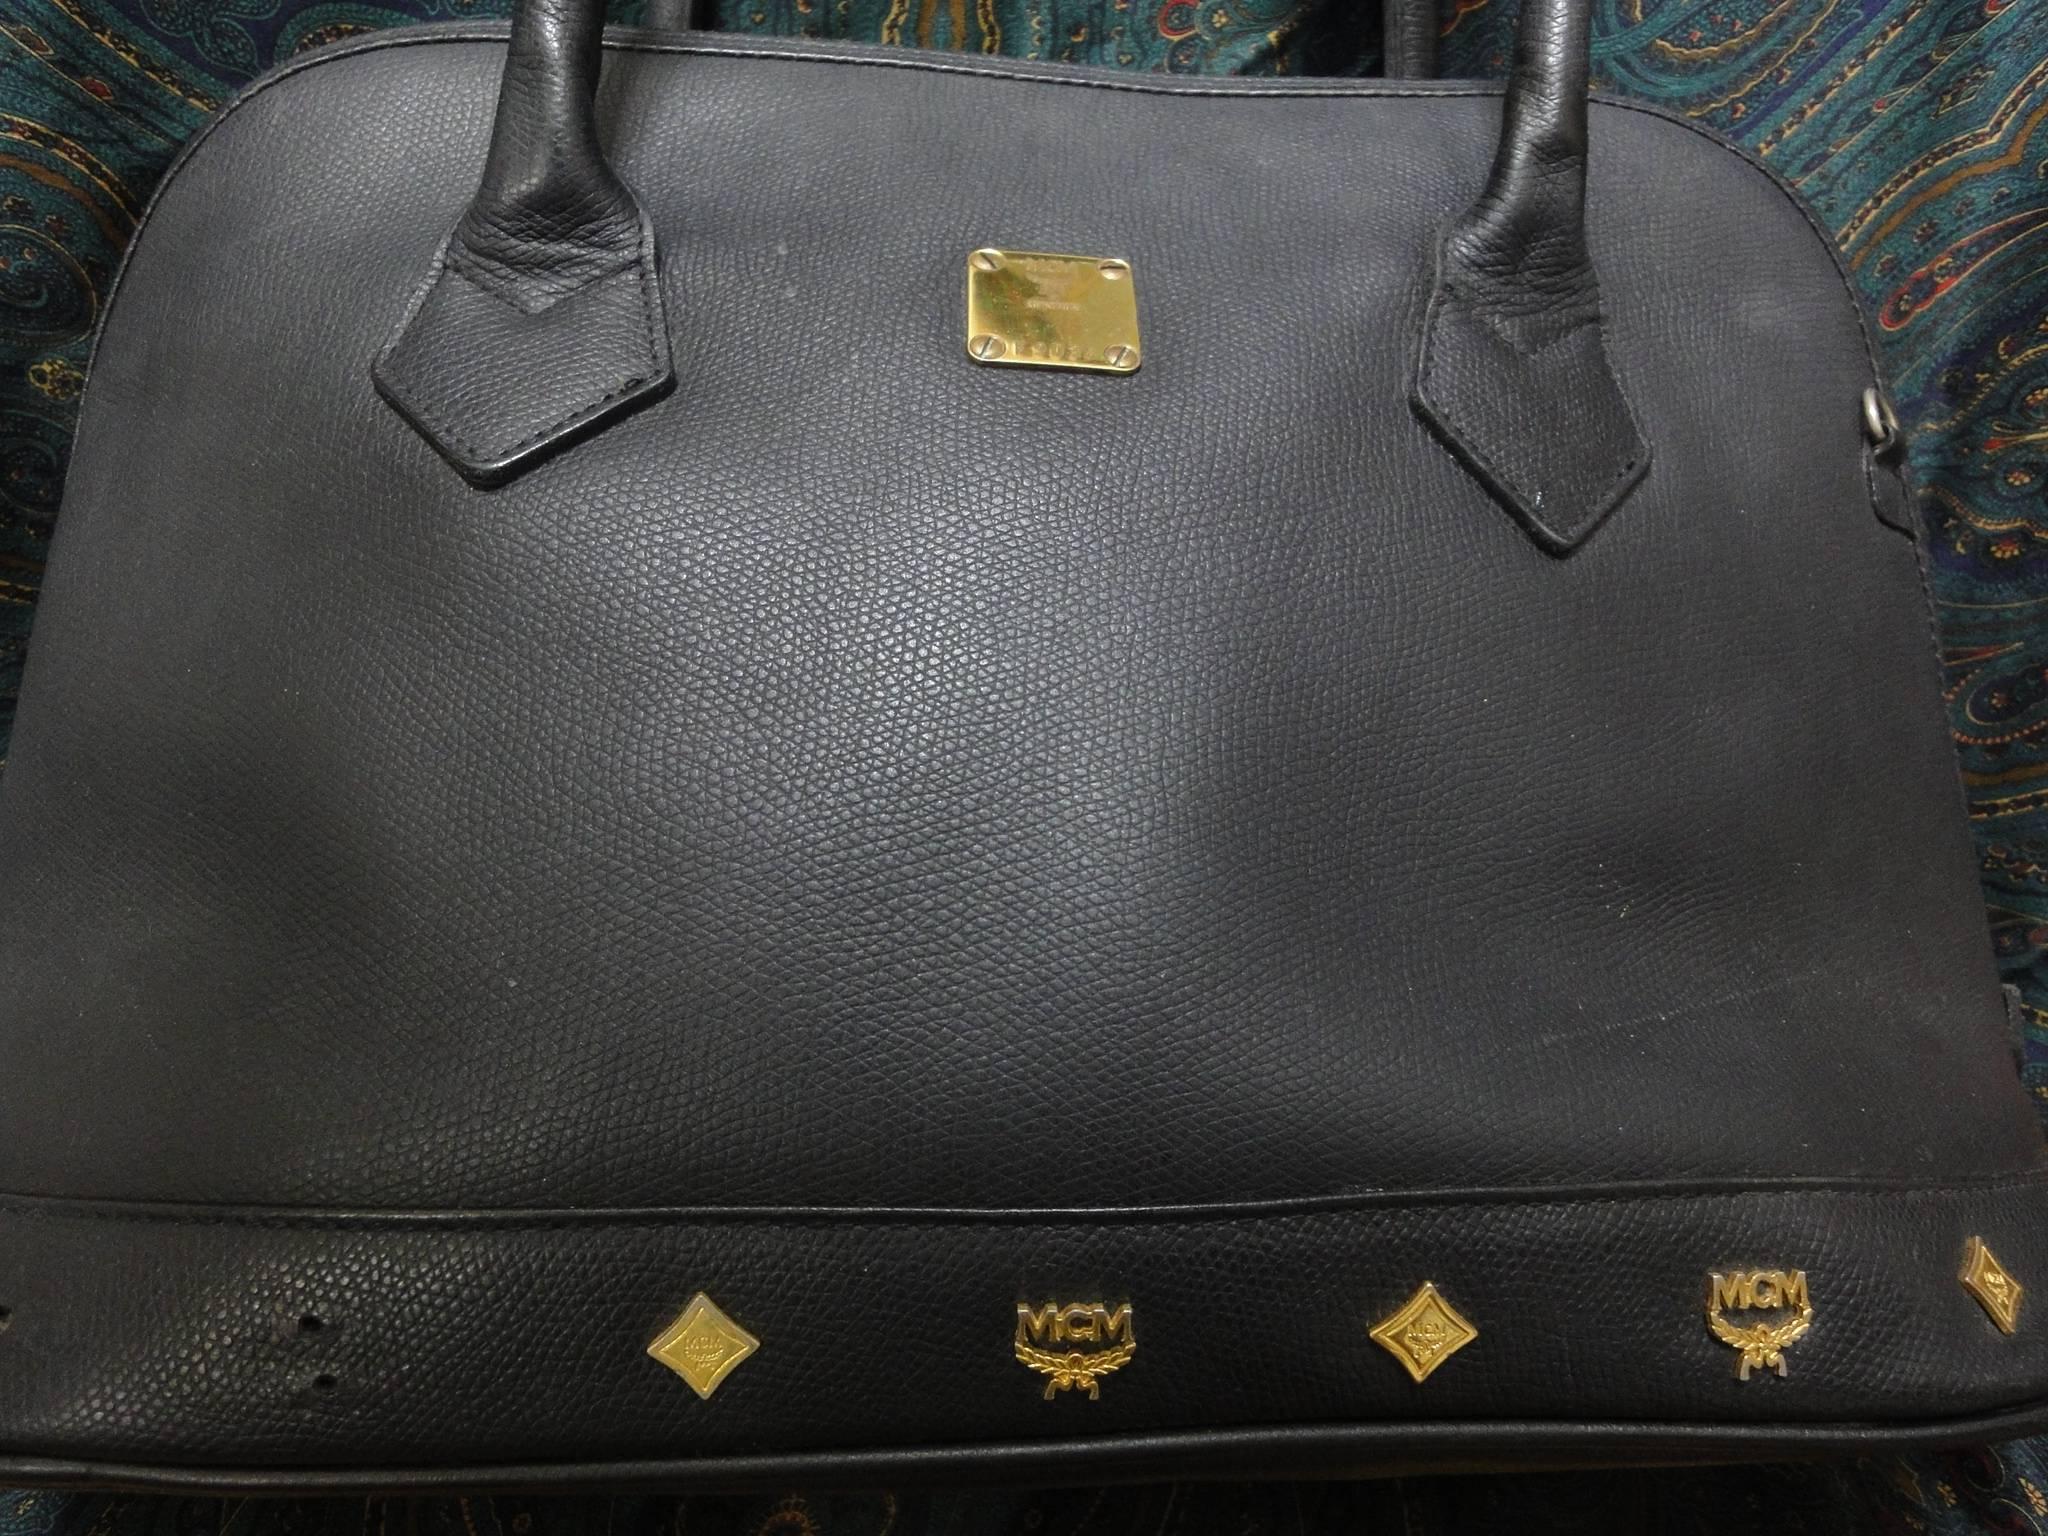 Vintage MCM black bolide style bag with gold tone metal studded charms. Designed by Michael Cromer. Masterpiece purse for unisex use.

MCM has been back in the fashion trend again!!
Now it's considered to be one of the must-have designer in